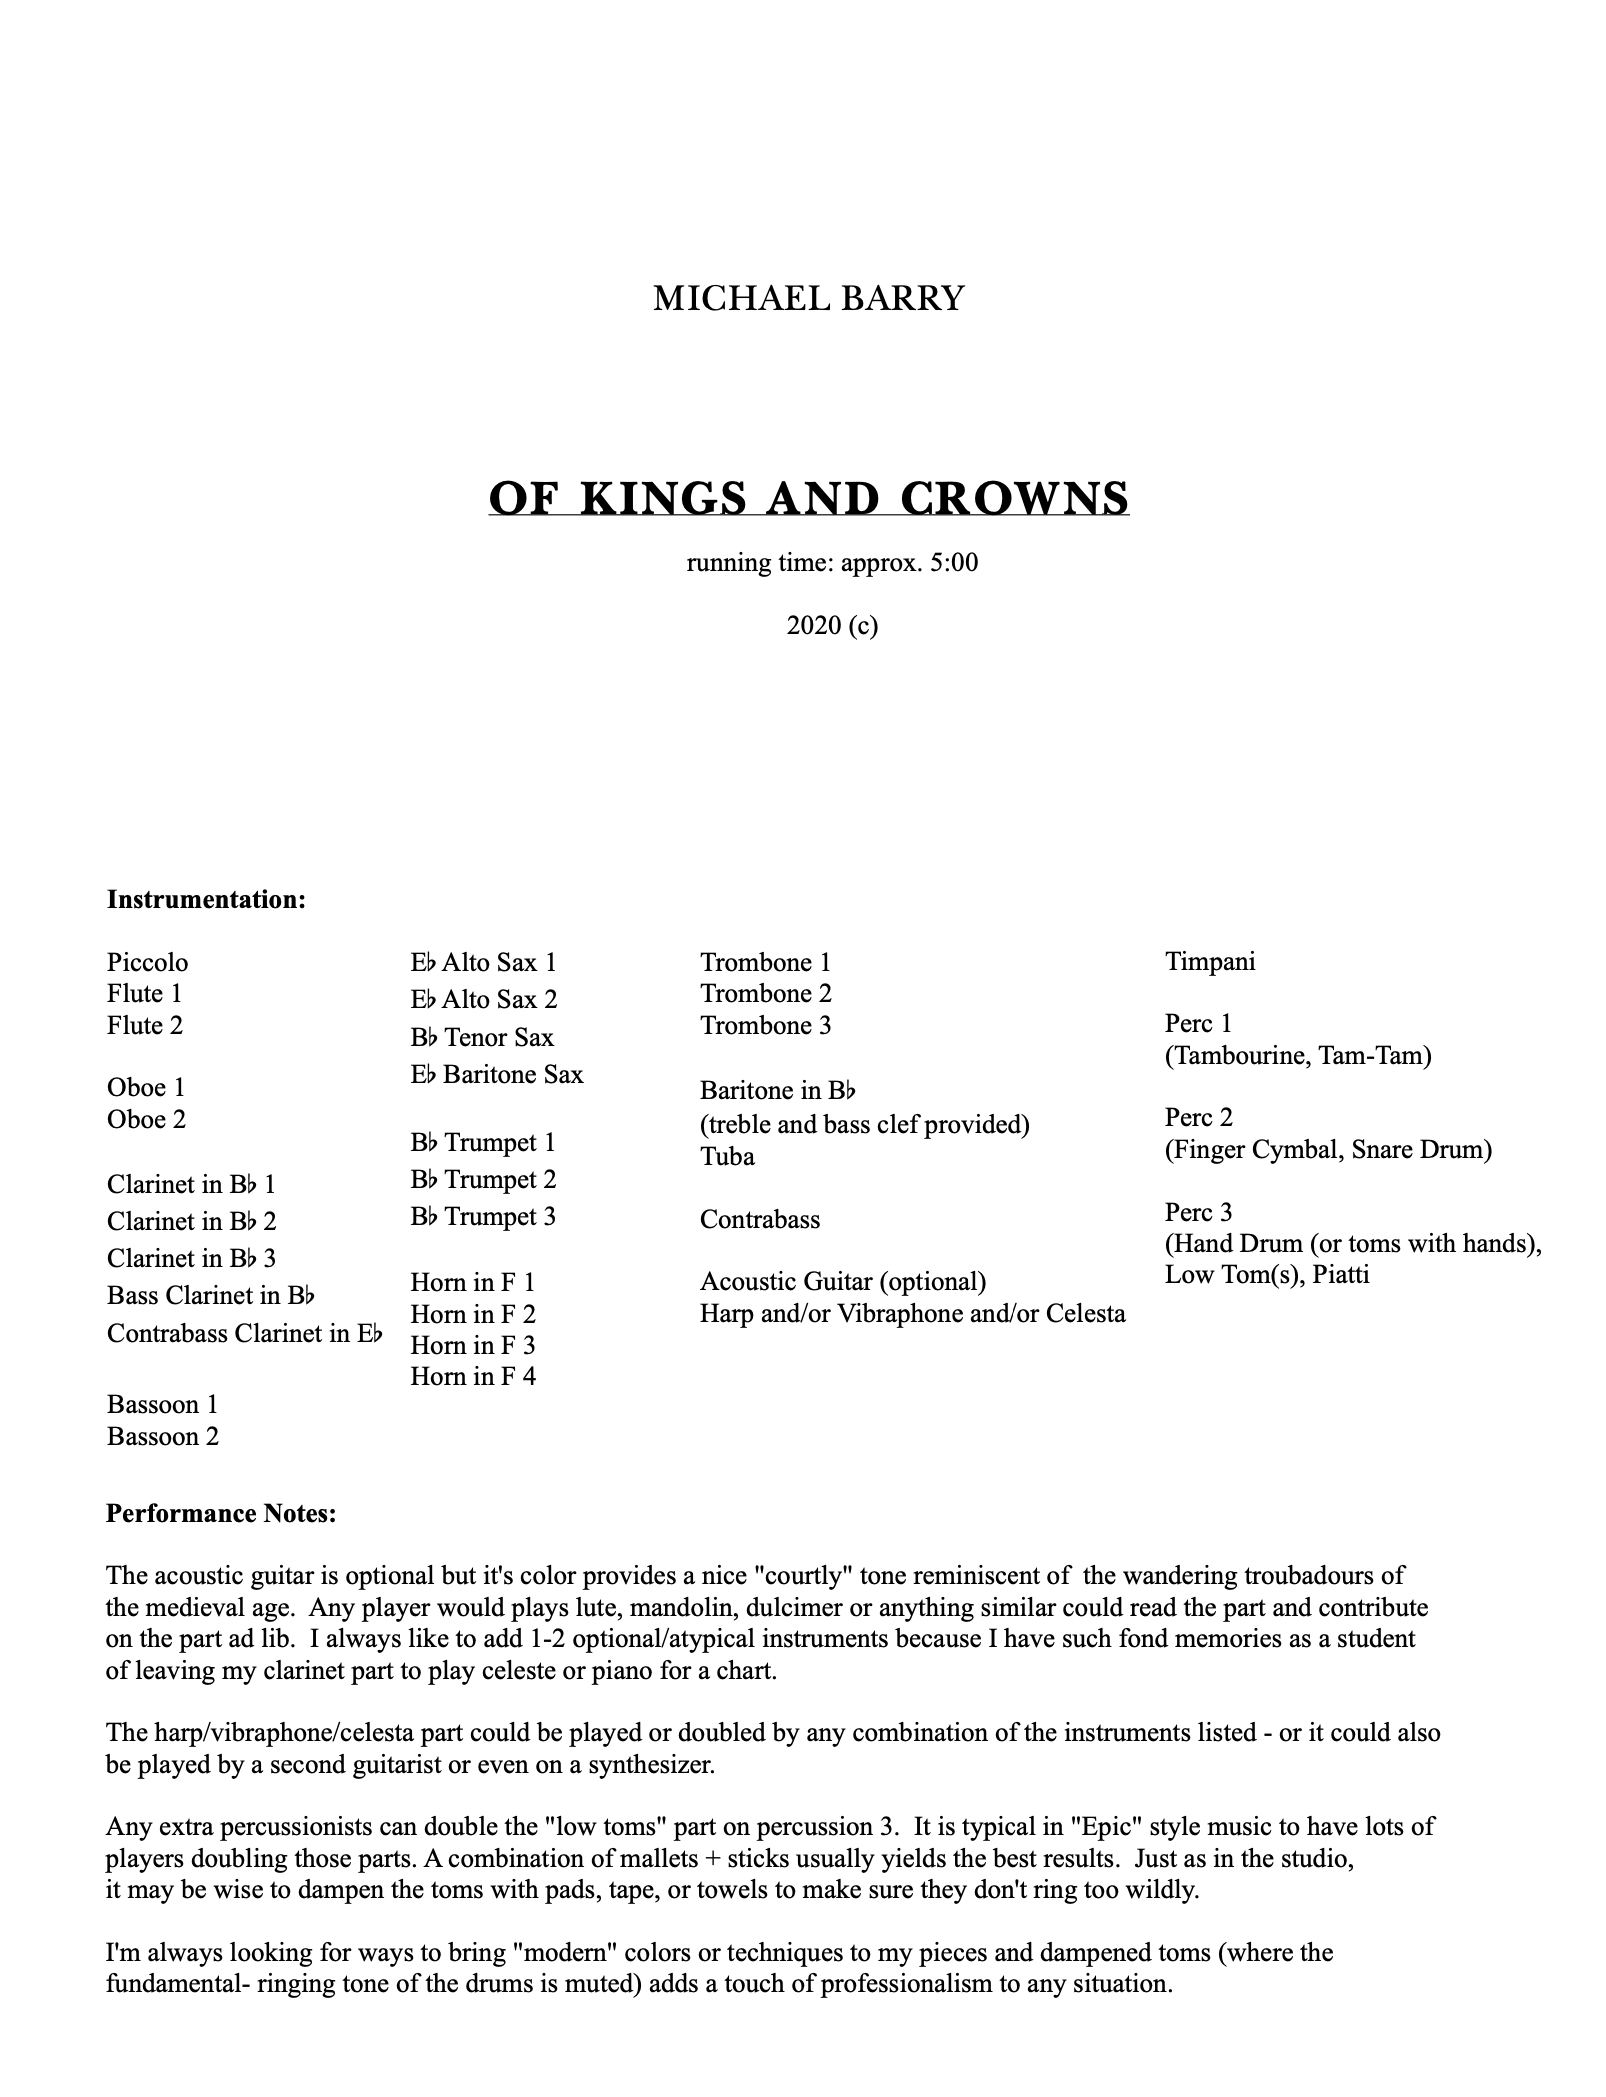 Of Kings And Crowns (Score Only) by Michael Barry